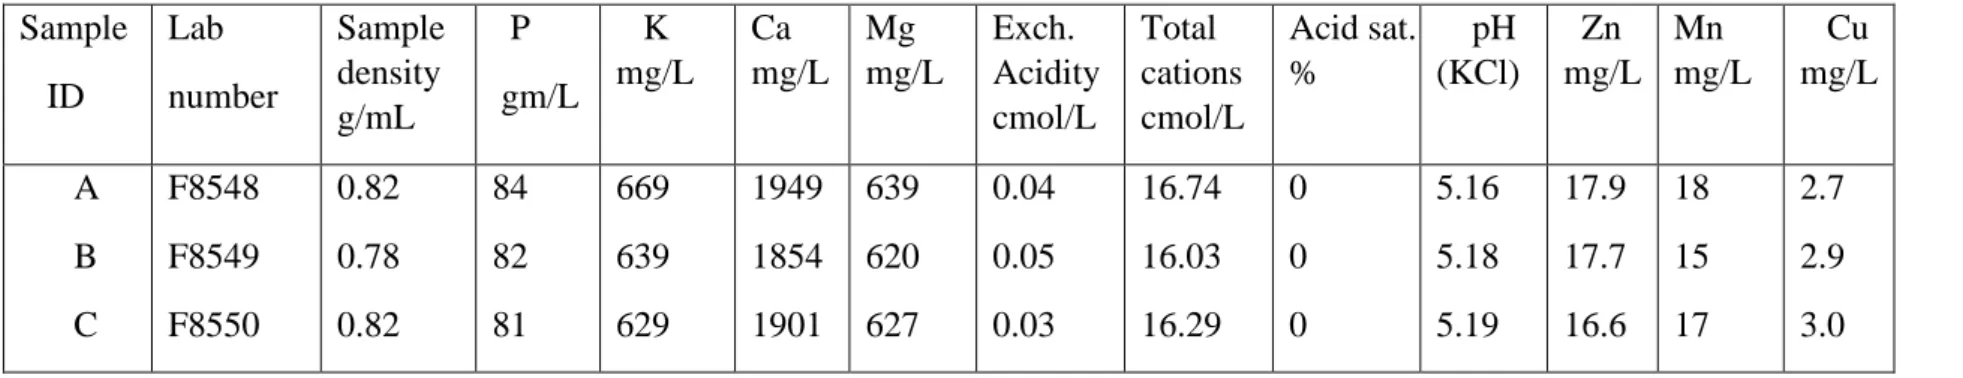 Table  2.1  Soil  fertility  of  the  used  potting  medium  mixed  with  local  soil  was  analysed  from  three  samples  (A,  B,  C)  at  the  ARC-Cedara,  Pietermaritzburg as described by (Manson and Roberts, 2000), and the physicochemical properties s